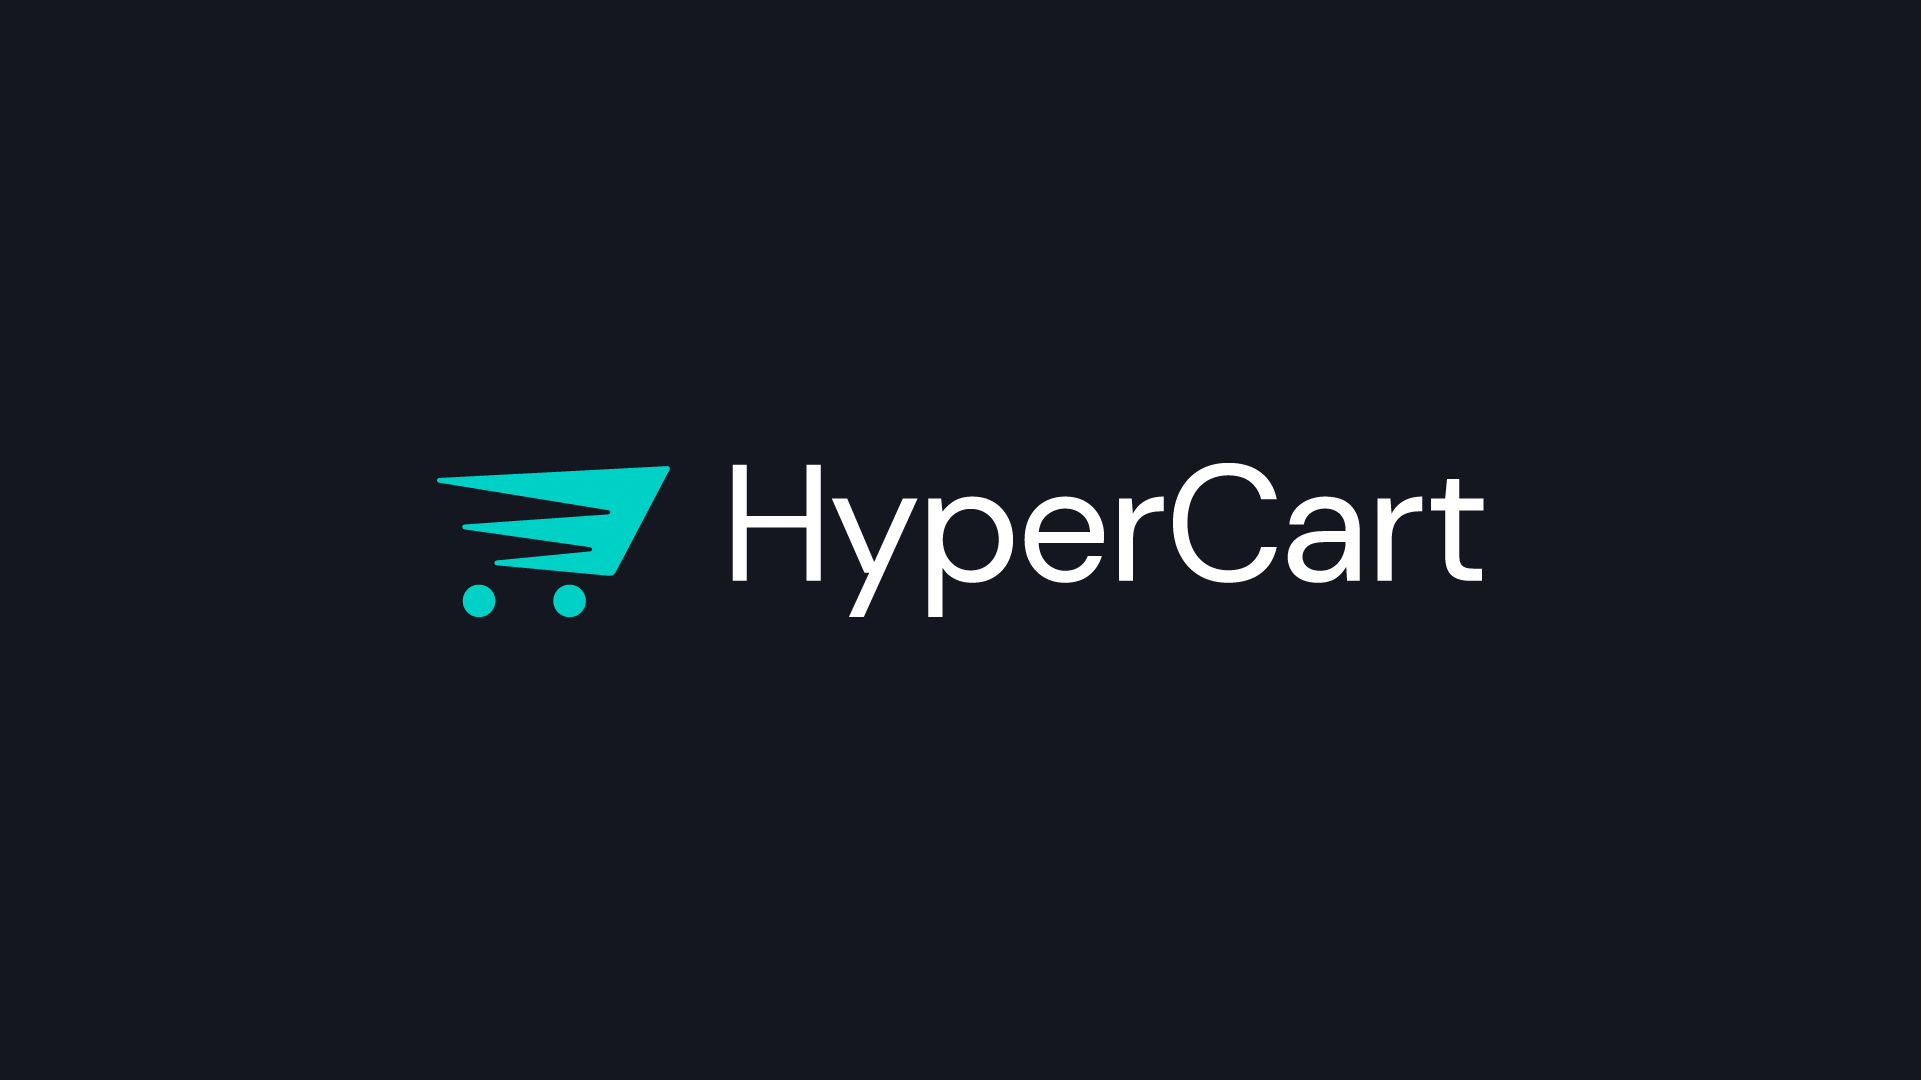 HyperCart - SaaS Software logo, cart design with speed elements, symbolizing efficiency and high-speed SaaS solutions